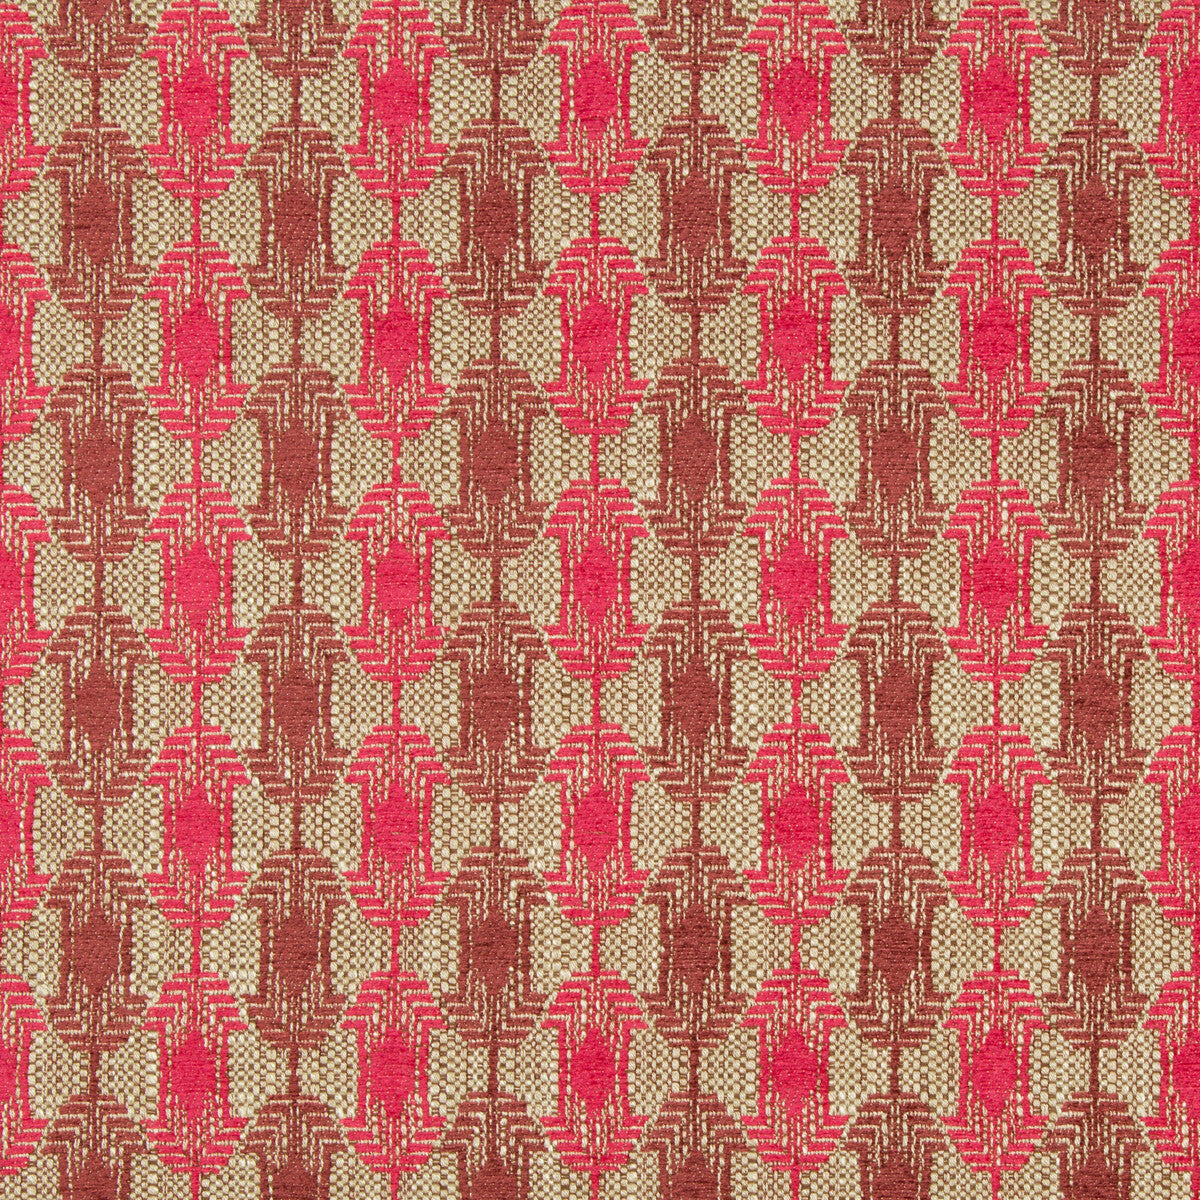 Quartz Weave fabric in cerise color - pattern GWF-3751.19.0 - by Lee Jofa Modern in the Gems collection